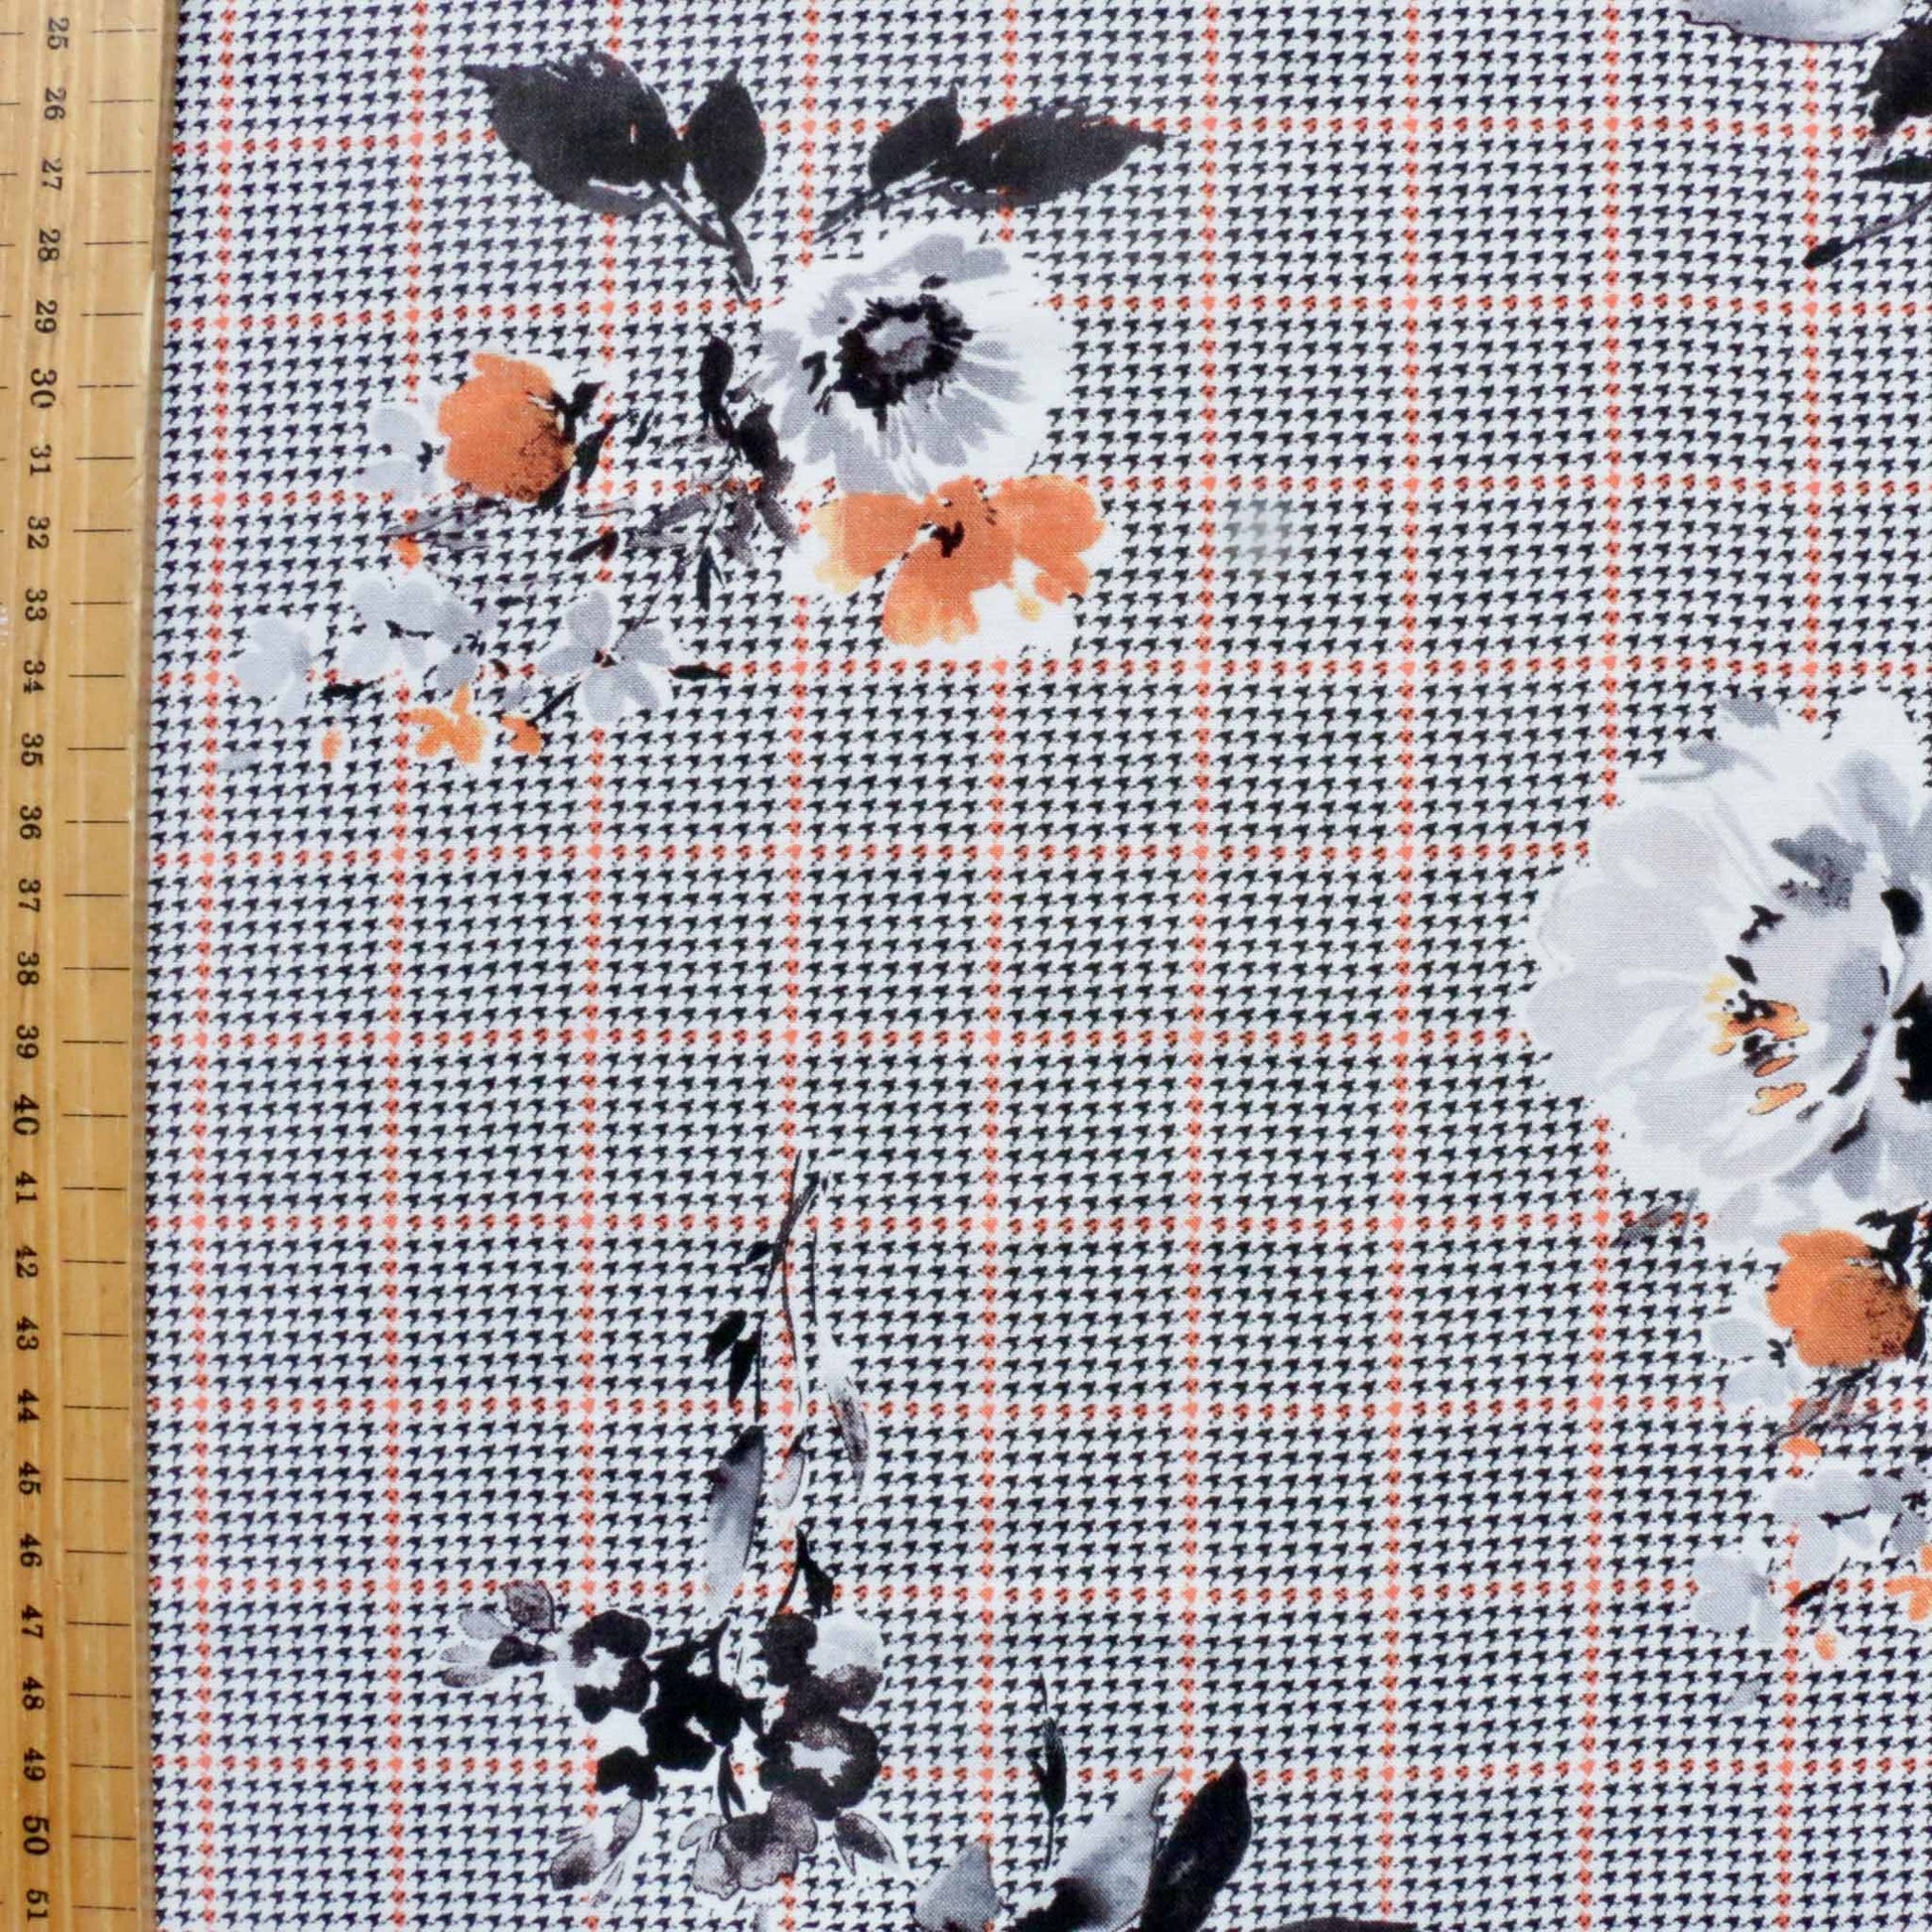 metre viscose challis dressmaking fabric with black houndstooth check pattern and white and orange floral print